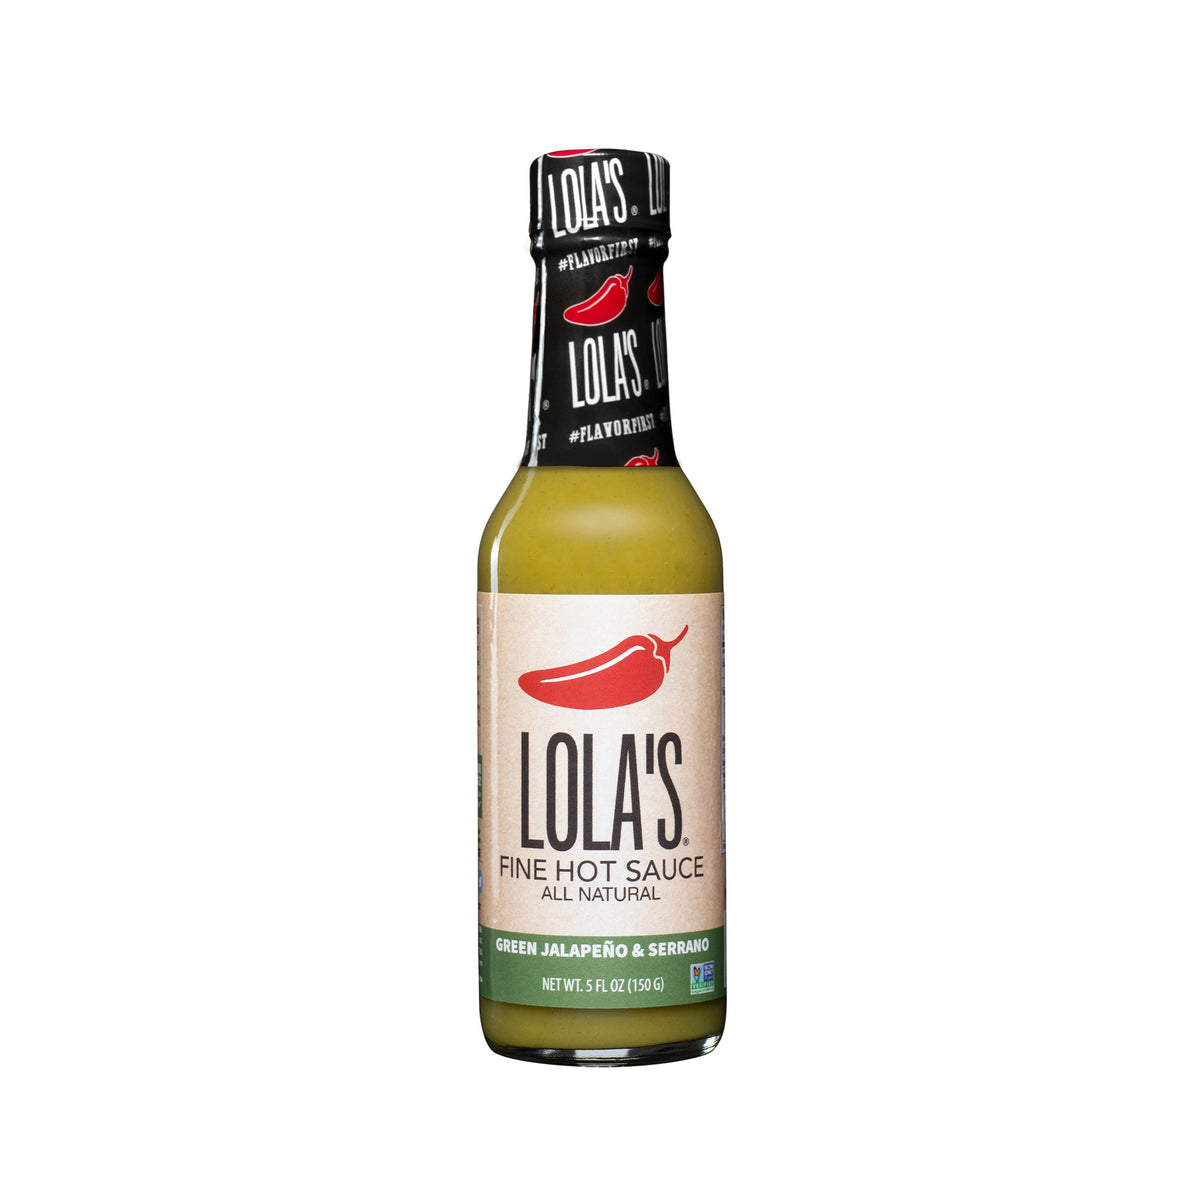 Lola's Green Jalapeño and Serrano Sauce, a 5 oz. glass bottle of flavorful hot sauce, perfect for seafood. All natural, plant-based, keto, low sodium, non-GMO, and gluten-free.